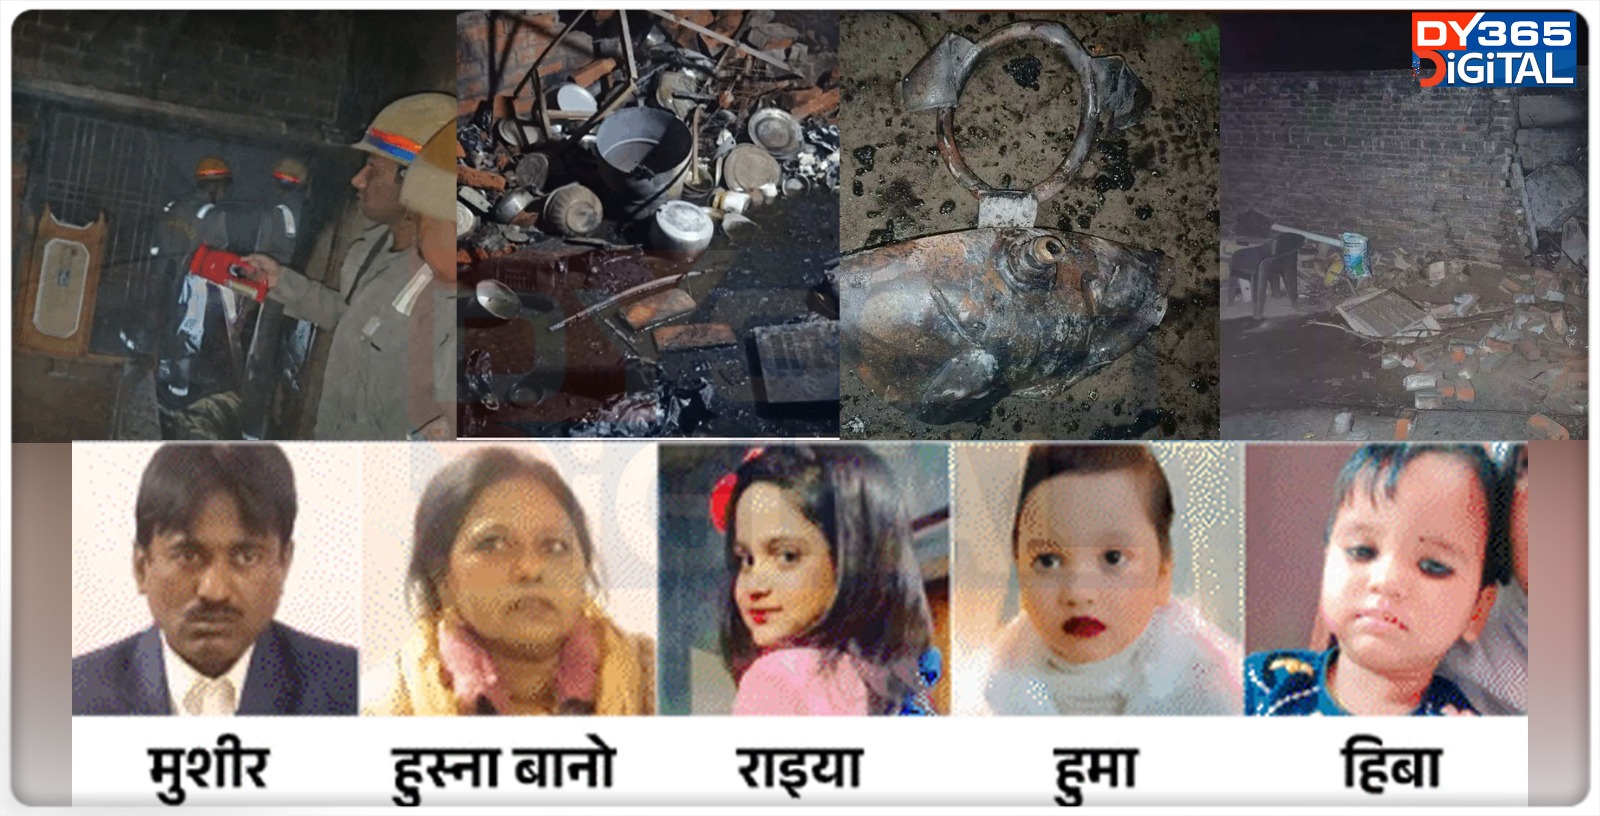 5-of-family-killed-in-twin-cylinder-blast-in-lucknow